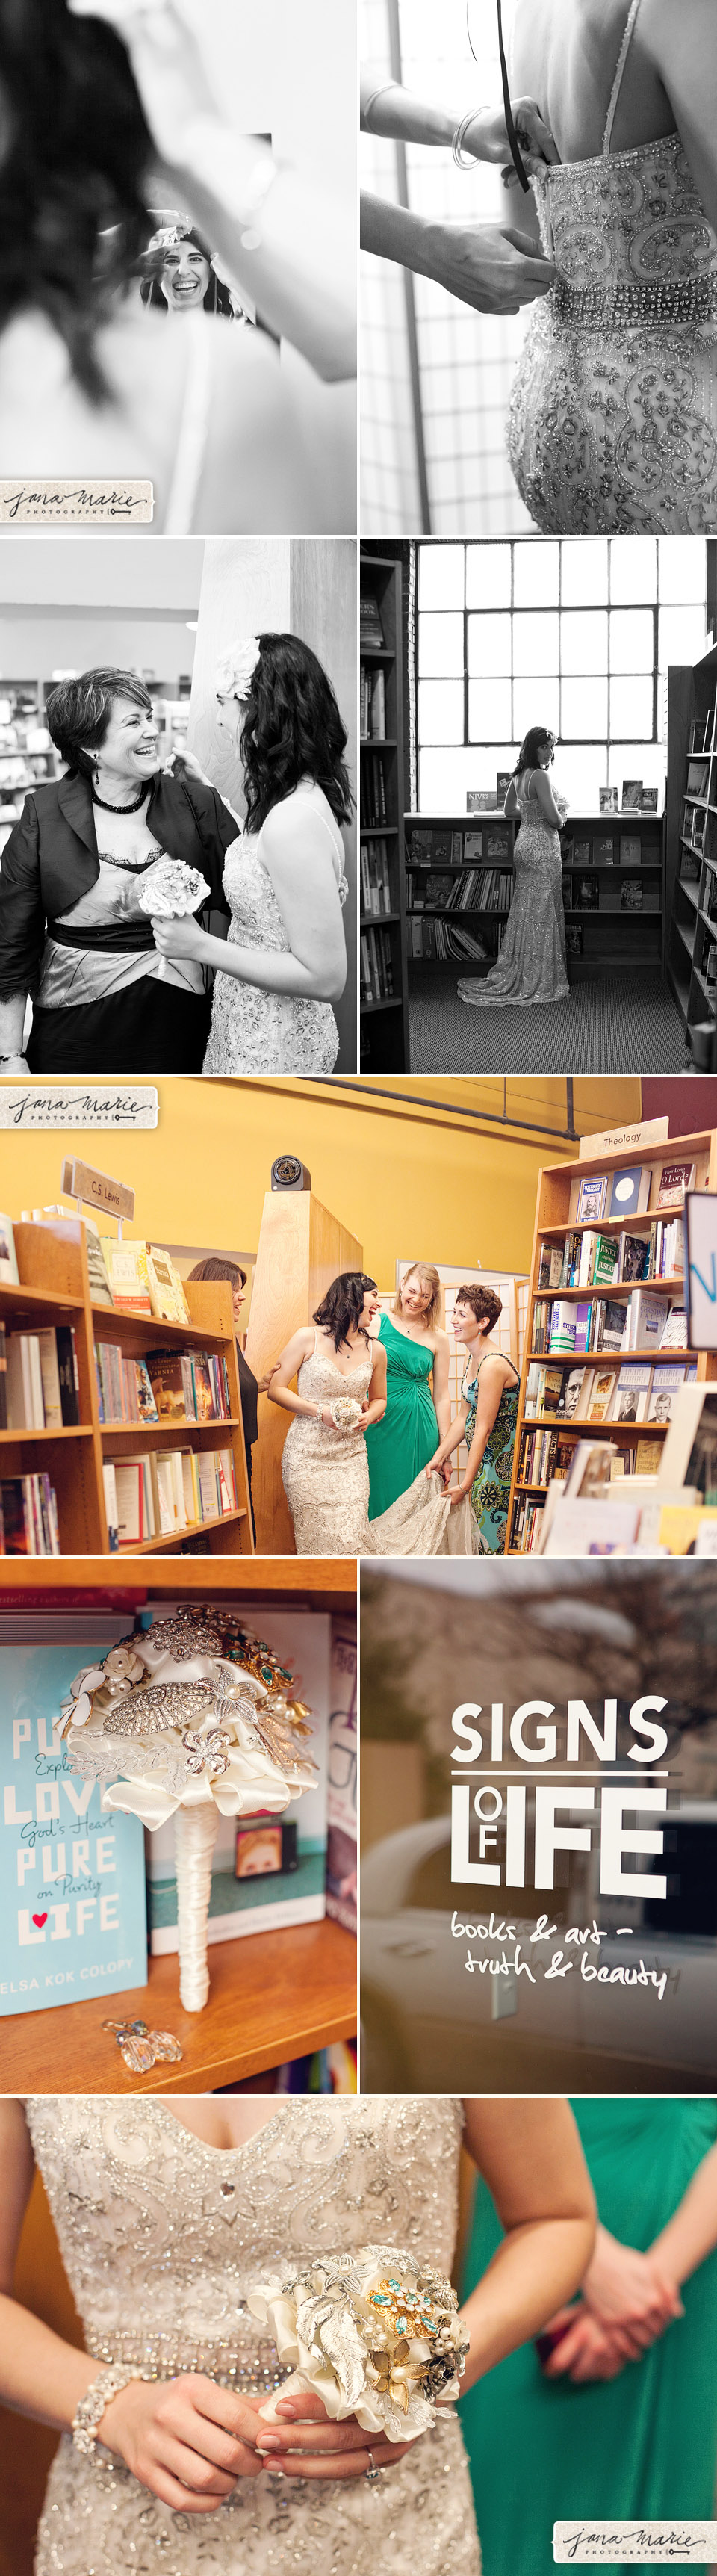 Jana Marie Photography, Book store wedding, colorful, details, laughter, getting ready